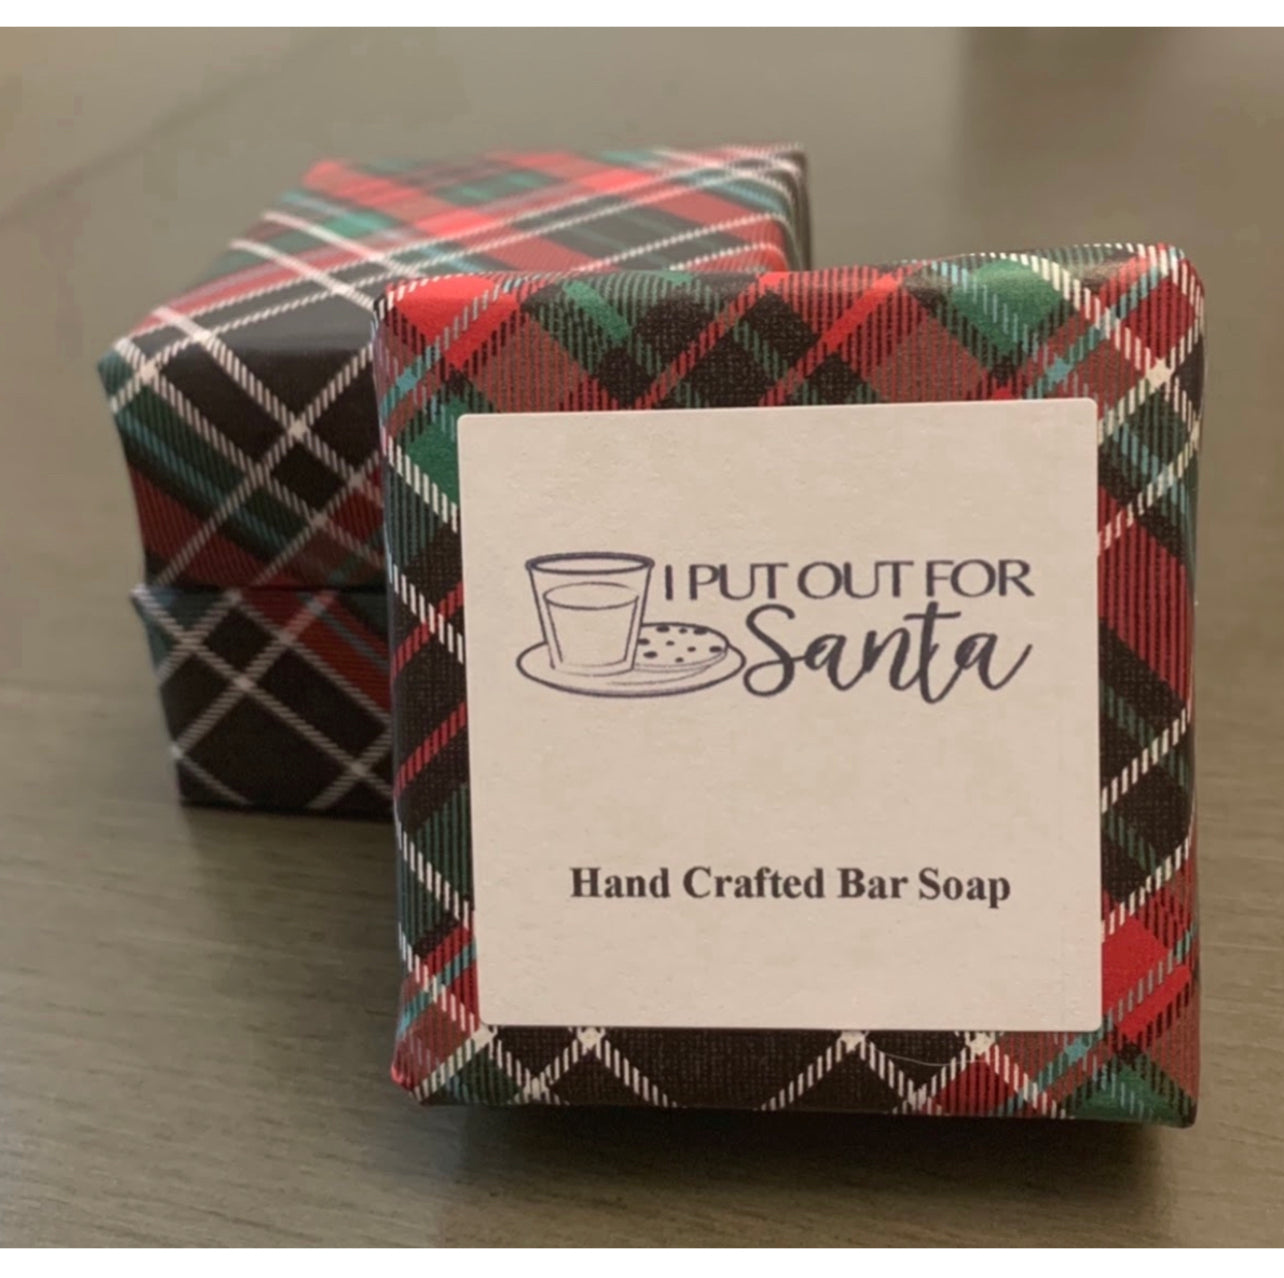 I Put Out for Santa! Hand Crafted Bar Soap - Mishmash